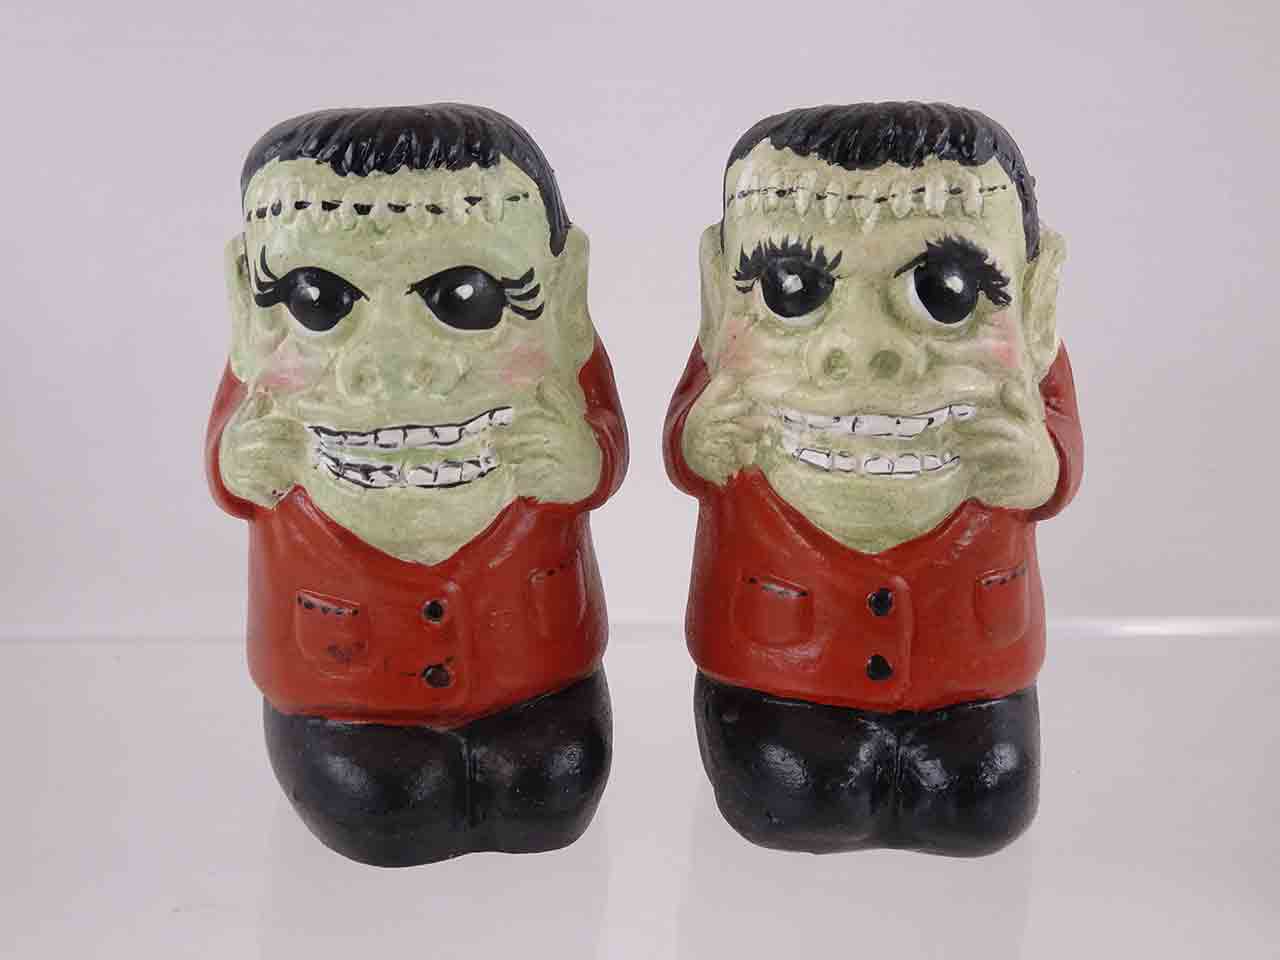 Halloween characters salt and pepper shakers possibly made by Jean Grief - Frankenstein